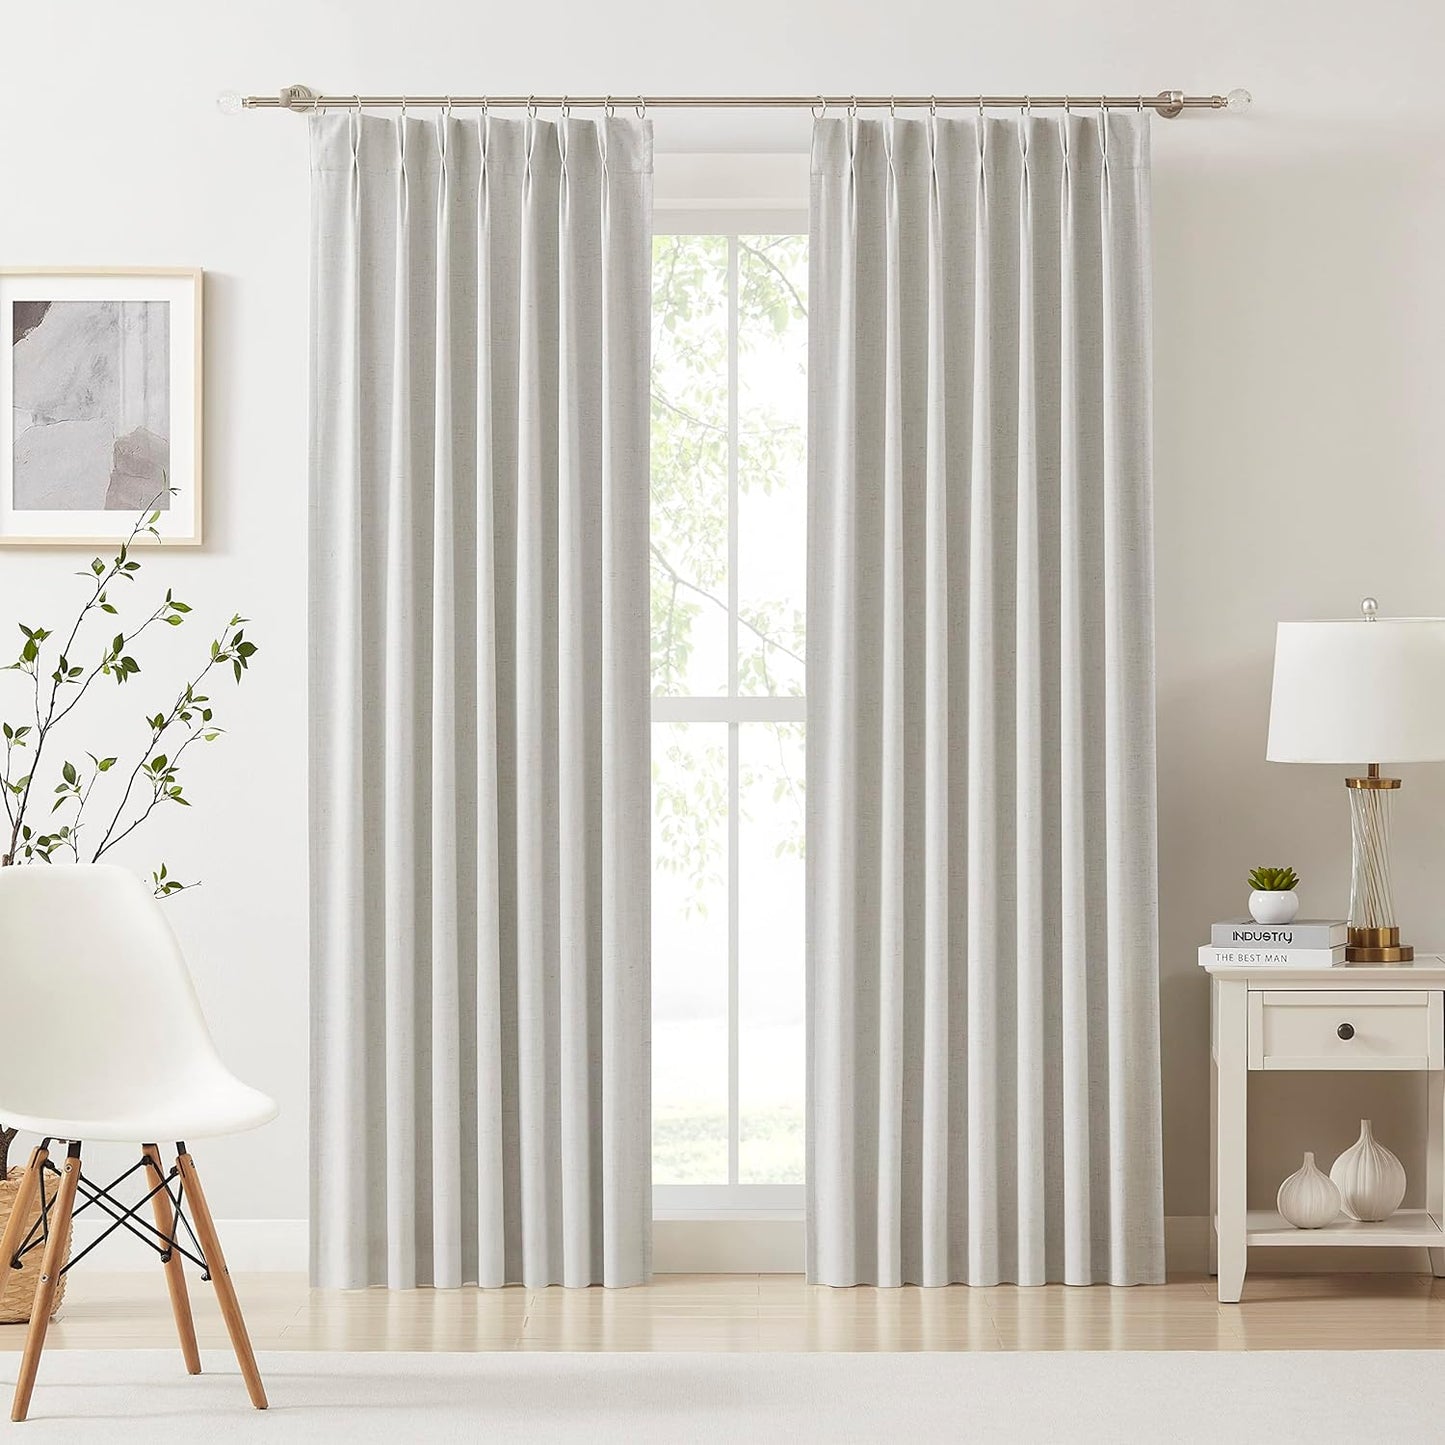 Kayne Studio Blended Linen Pinch Pleat Blackout Curtains 84 Inch Long for Living Room Bedroom,Thermal Insulated Window Treatments Pleated Drapes for Track with 9 Hooks,40"X84",Dark Linen,1 Panel  Kayne Studio Natural 40"X72"X1 